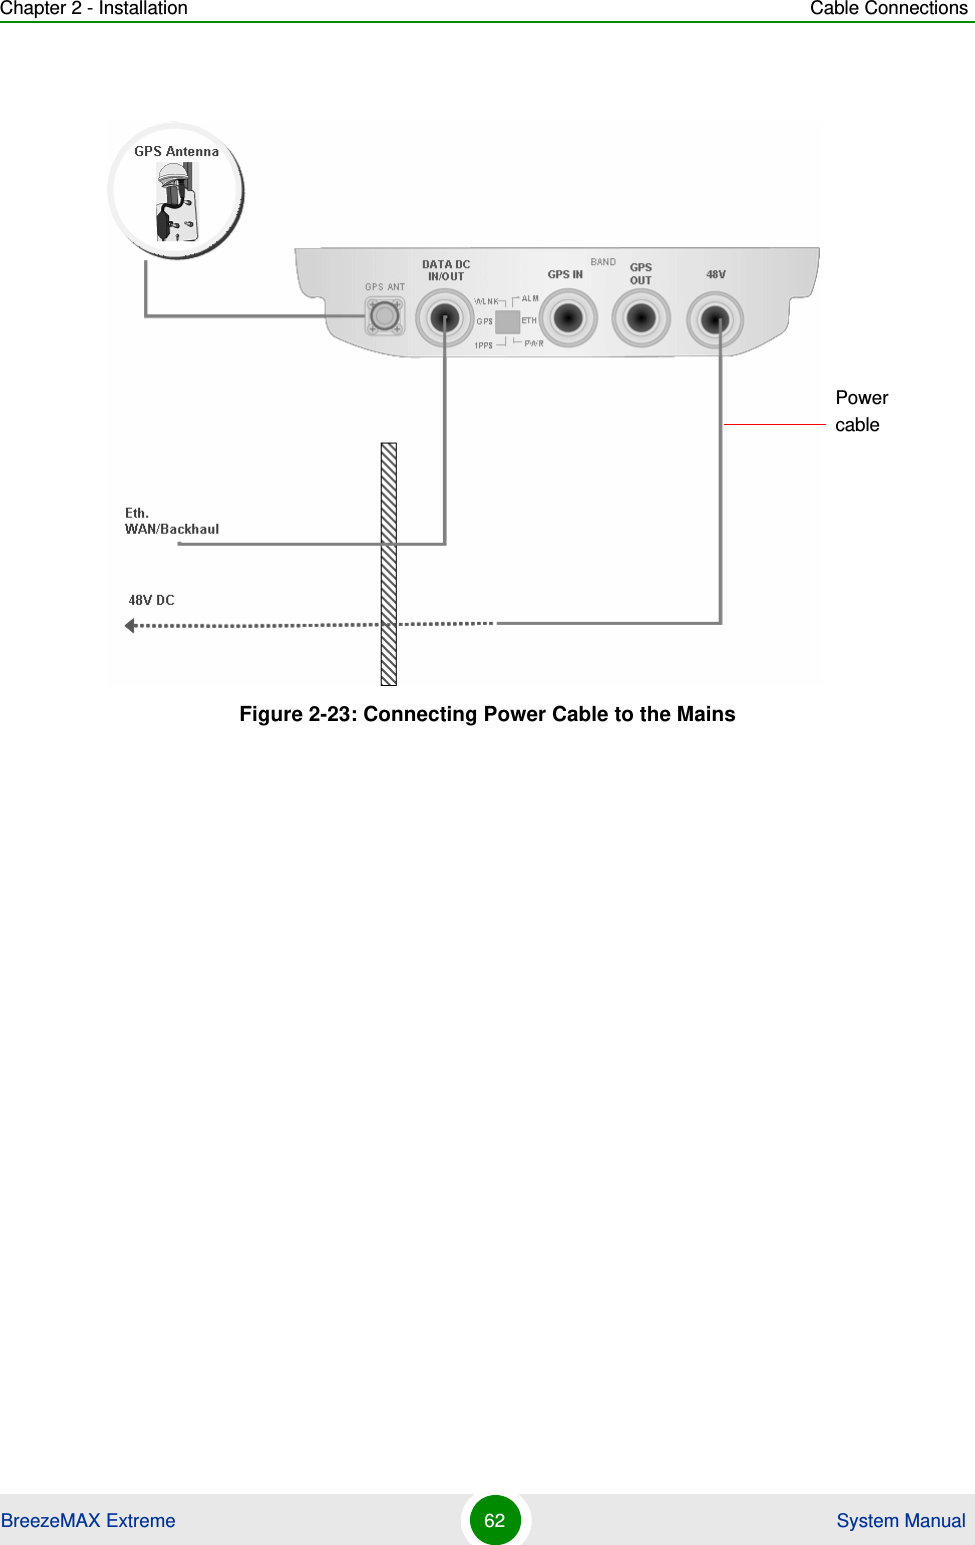 Chapter 2 - Installation Cable ConnectionsBreezeMAX Extreme 62  System ManualFigure 2-23: Connecting Power Cable to the MainsPower cable